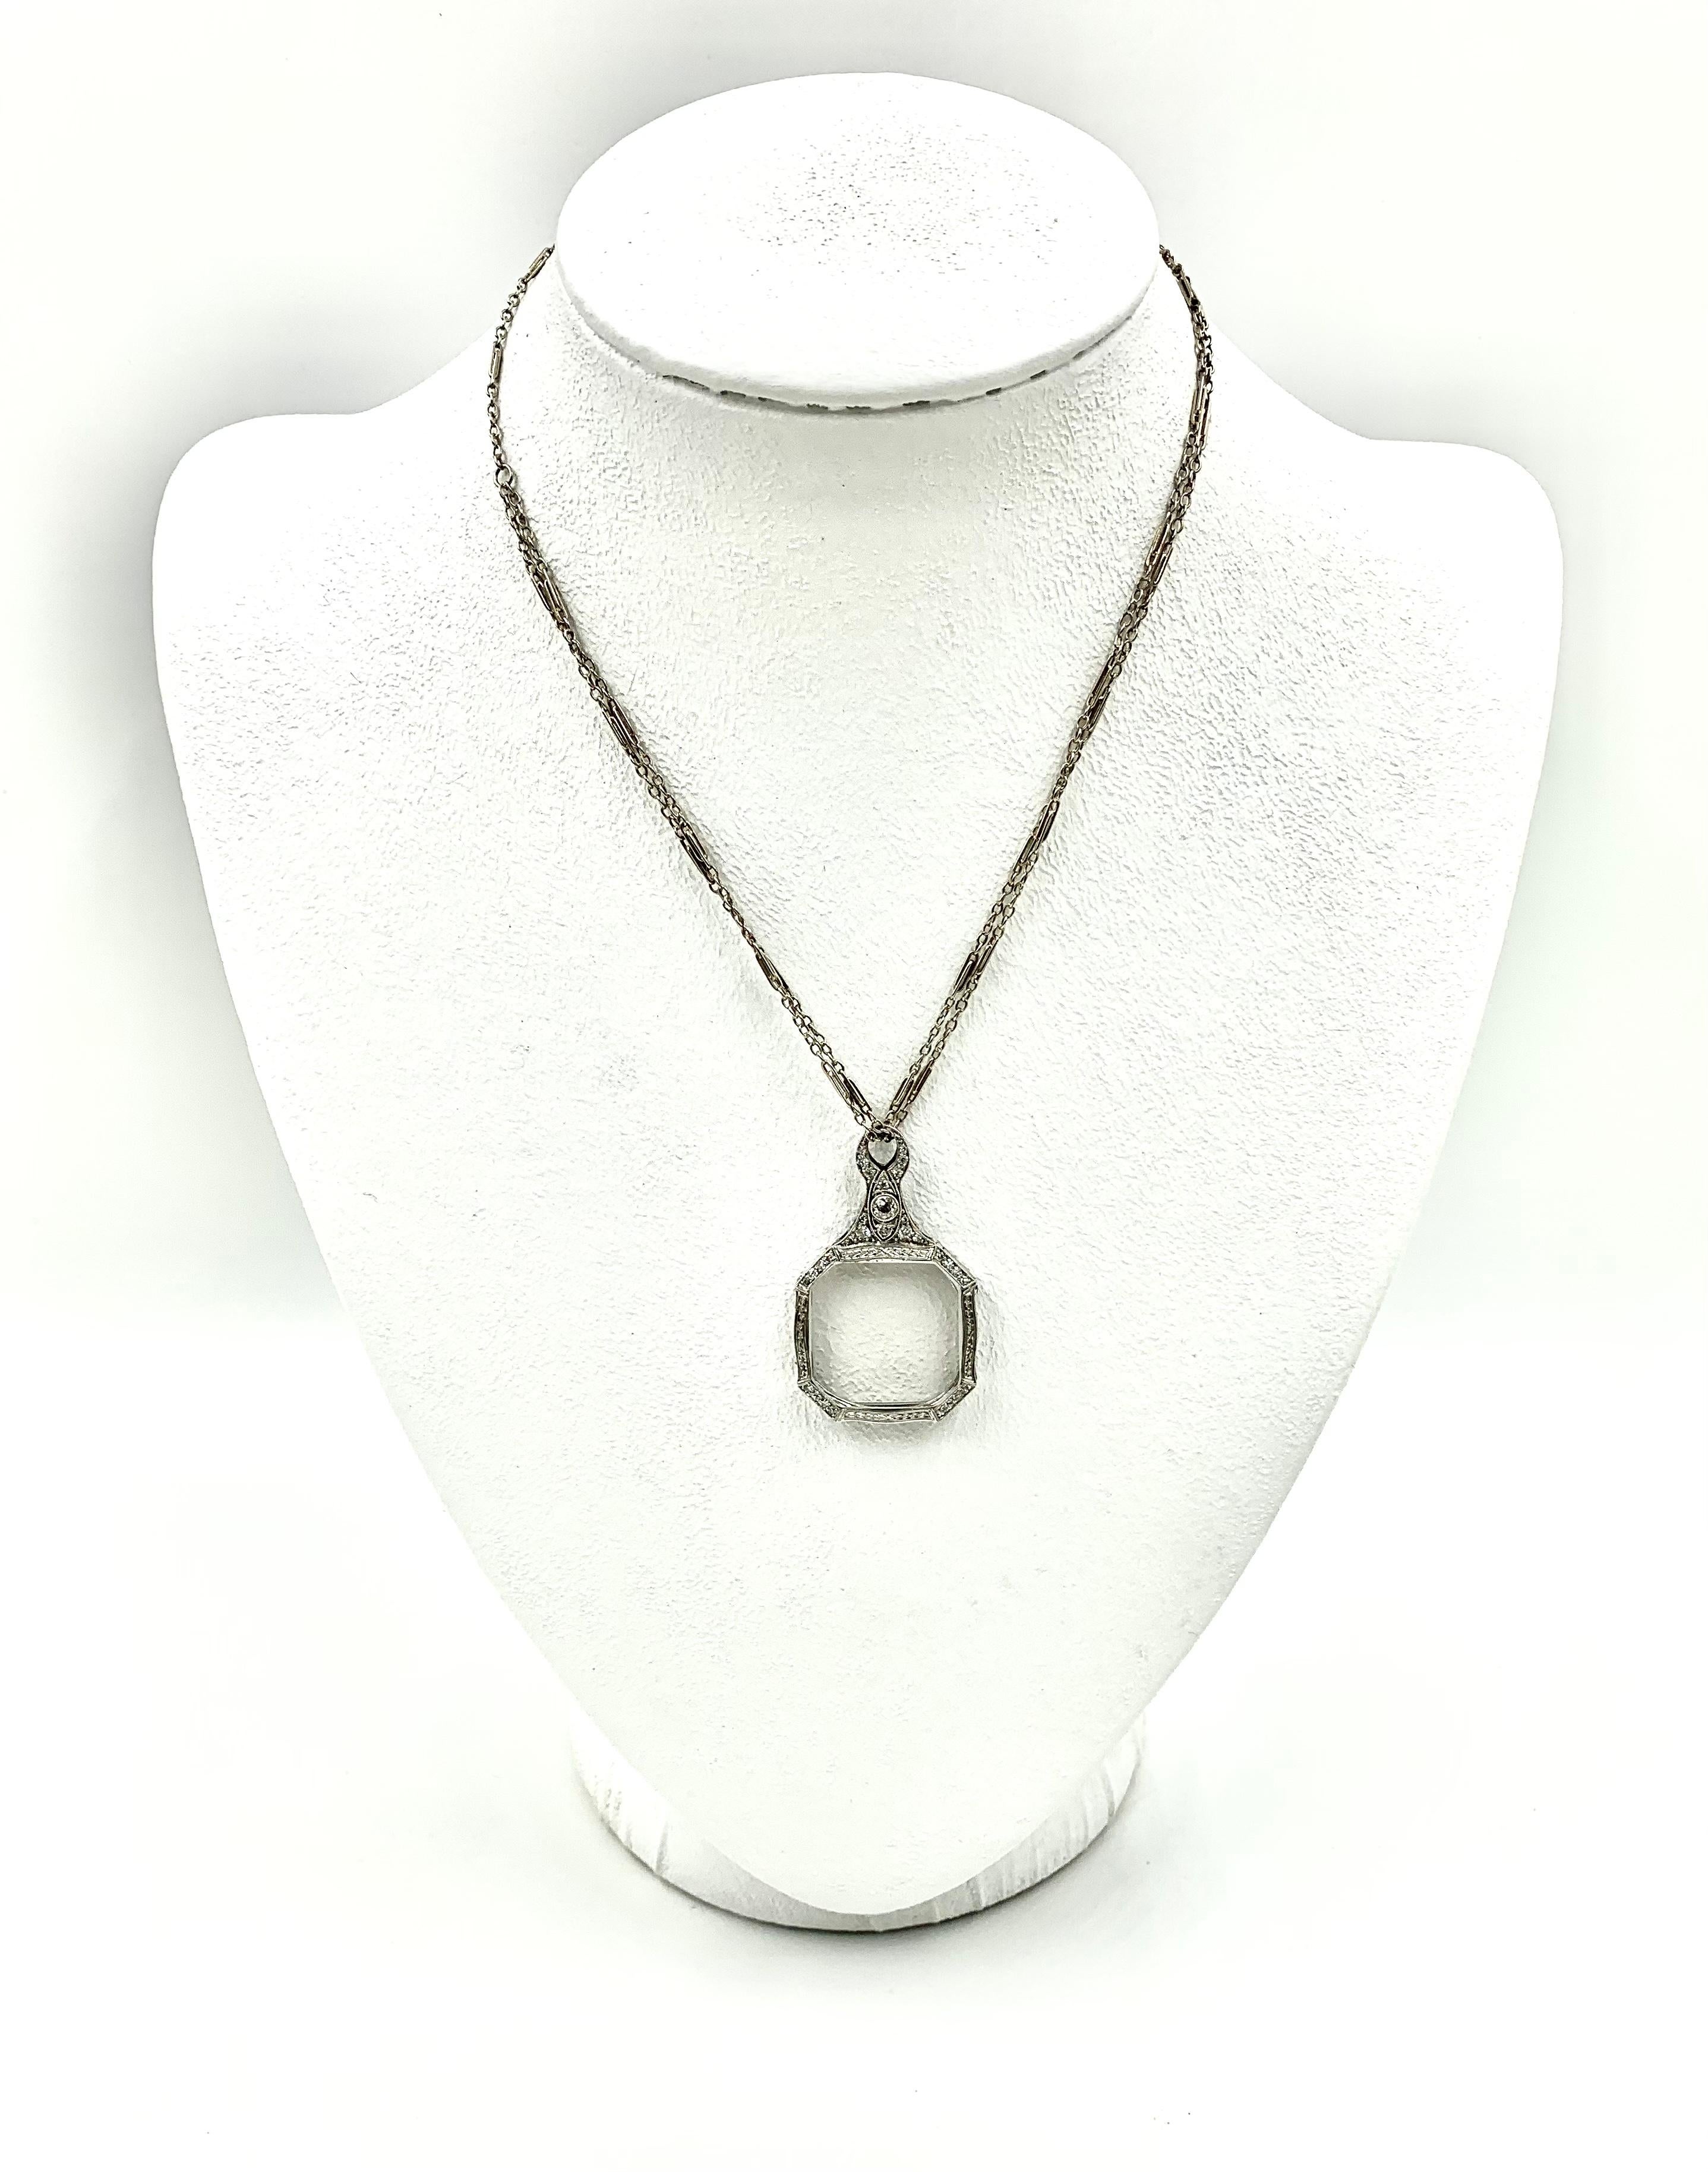 This fabulous transformative jewel wears beautifully as a large diamond set pendant and transforms to a stylish lorgnette with a push of a button. Featuring 30 Old Mine diamonds, with the largest diamond set in an unusual inverted eye design. On a